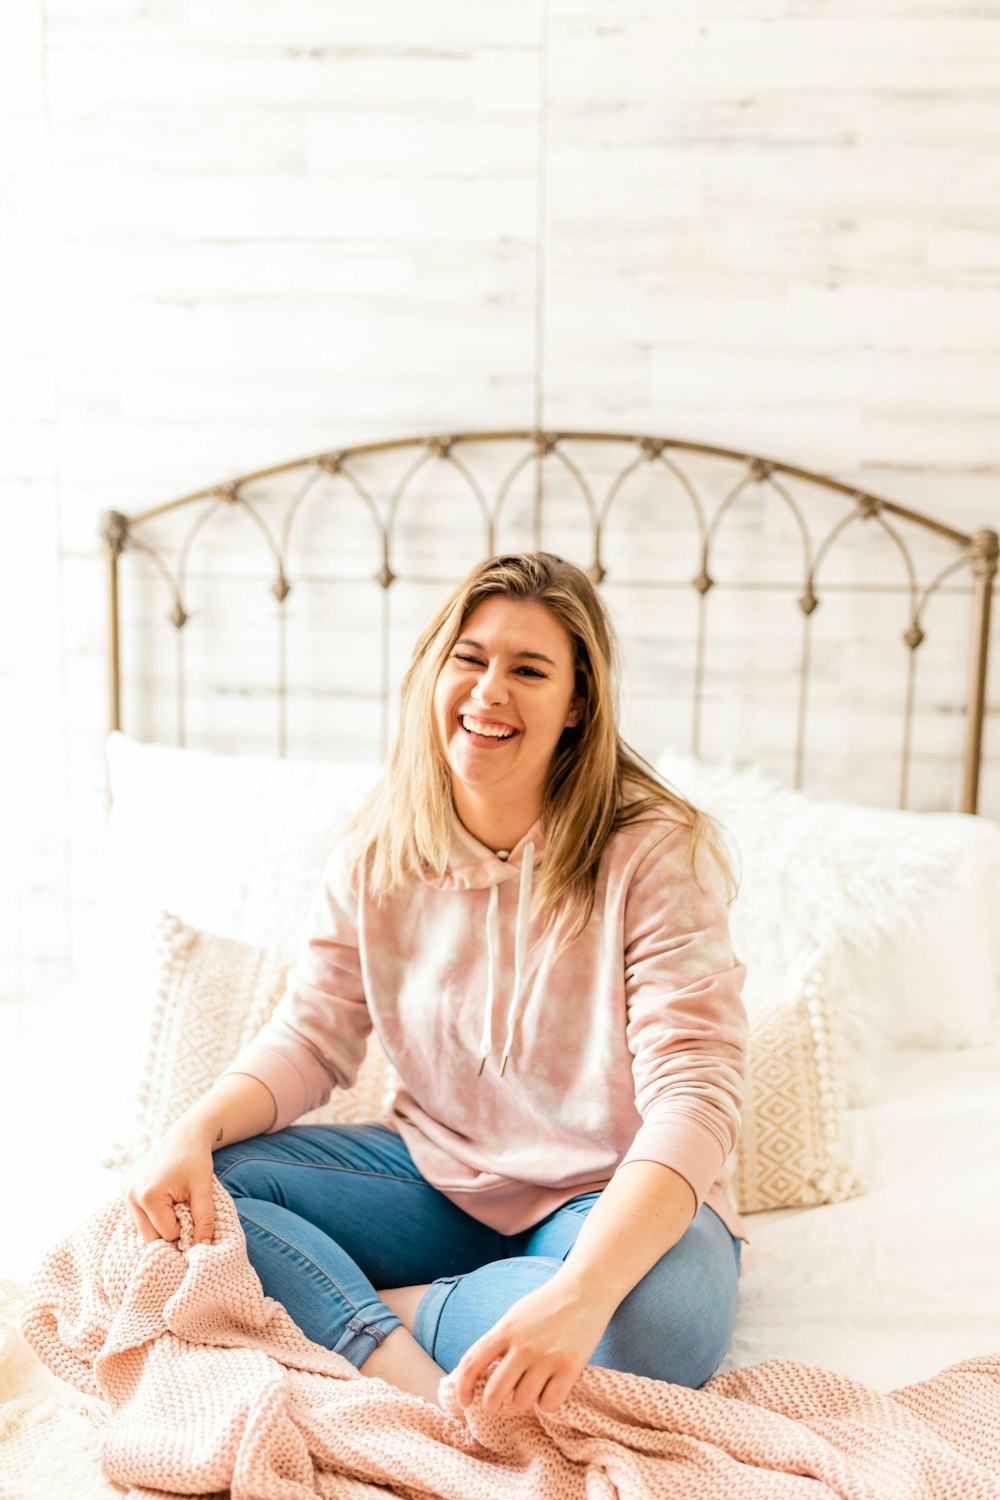 a woman sitting on a bed smiling for the camera